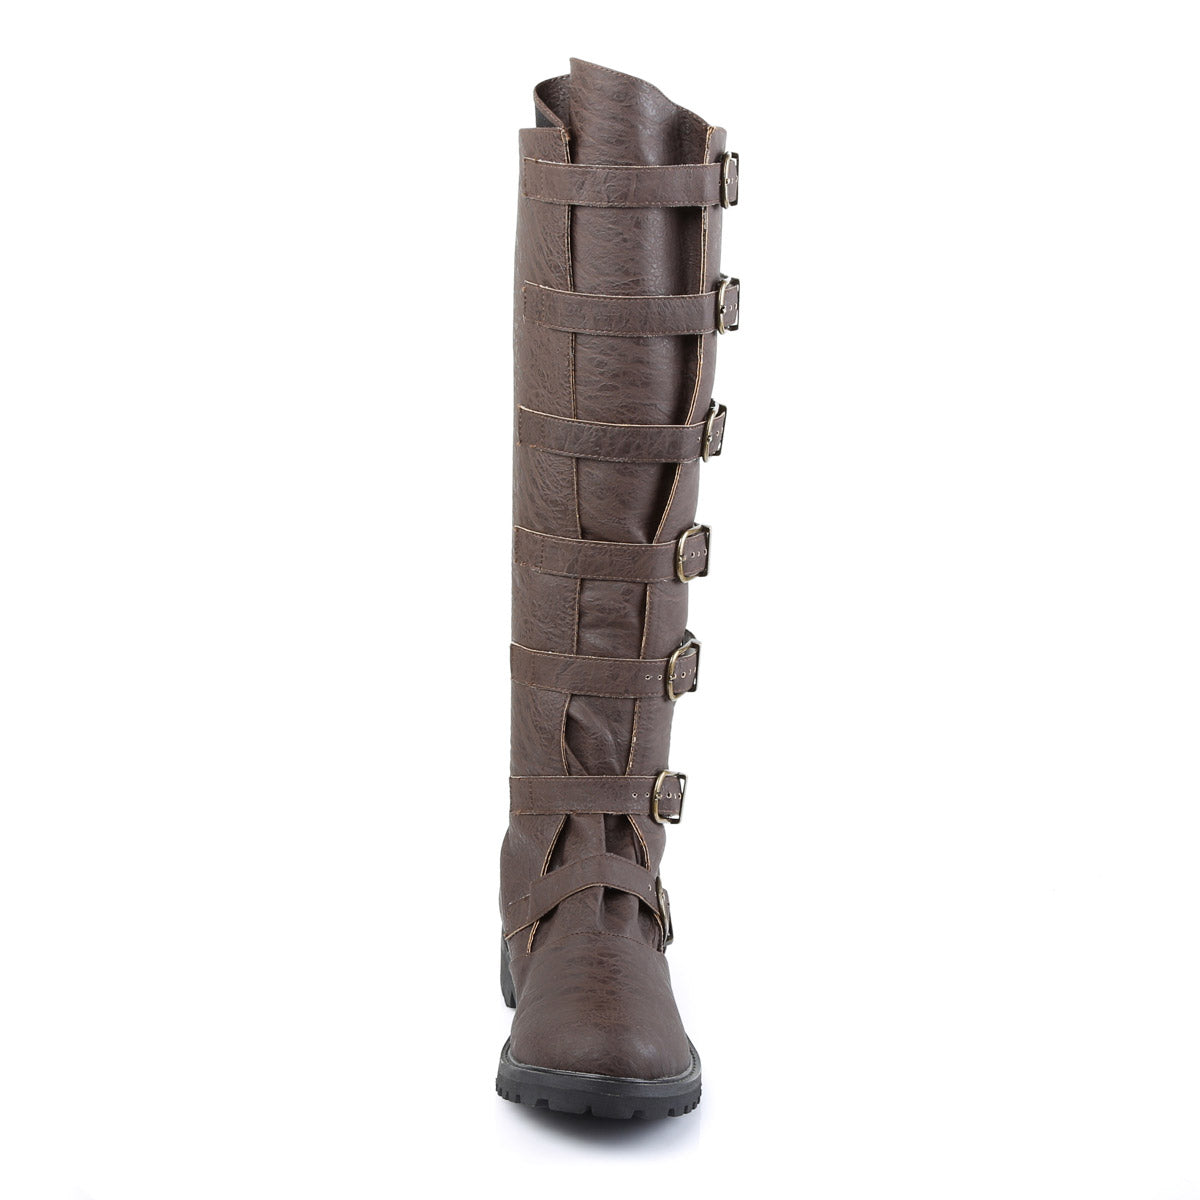 Expandable Shaft Multi Buckle Strap Knee Length Pull On Boots Shoes Pleaser Funtasma GOTHAM/110